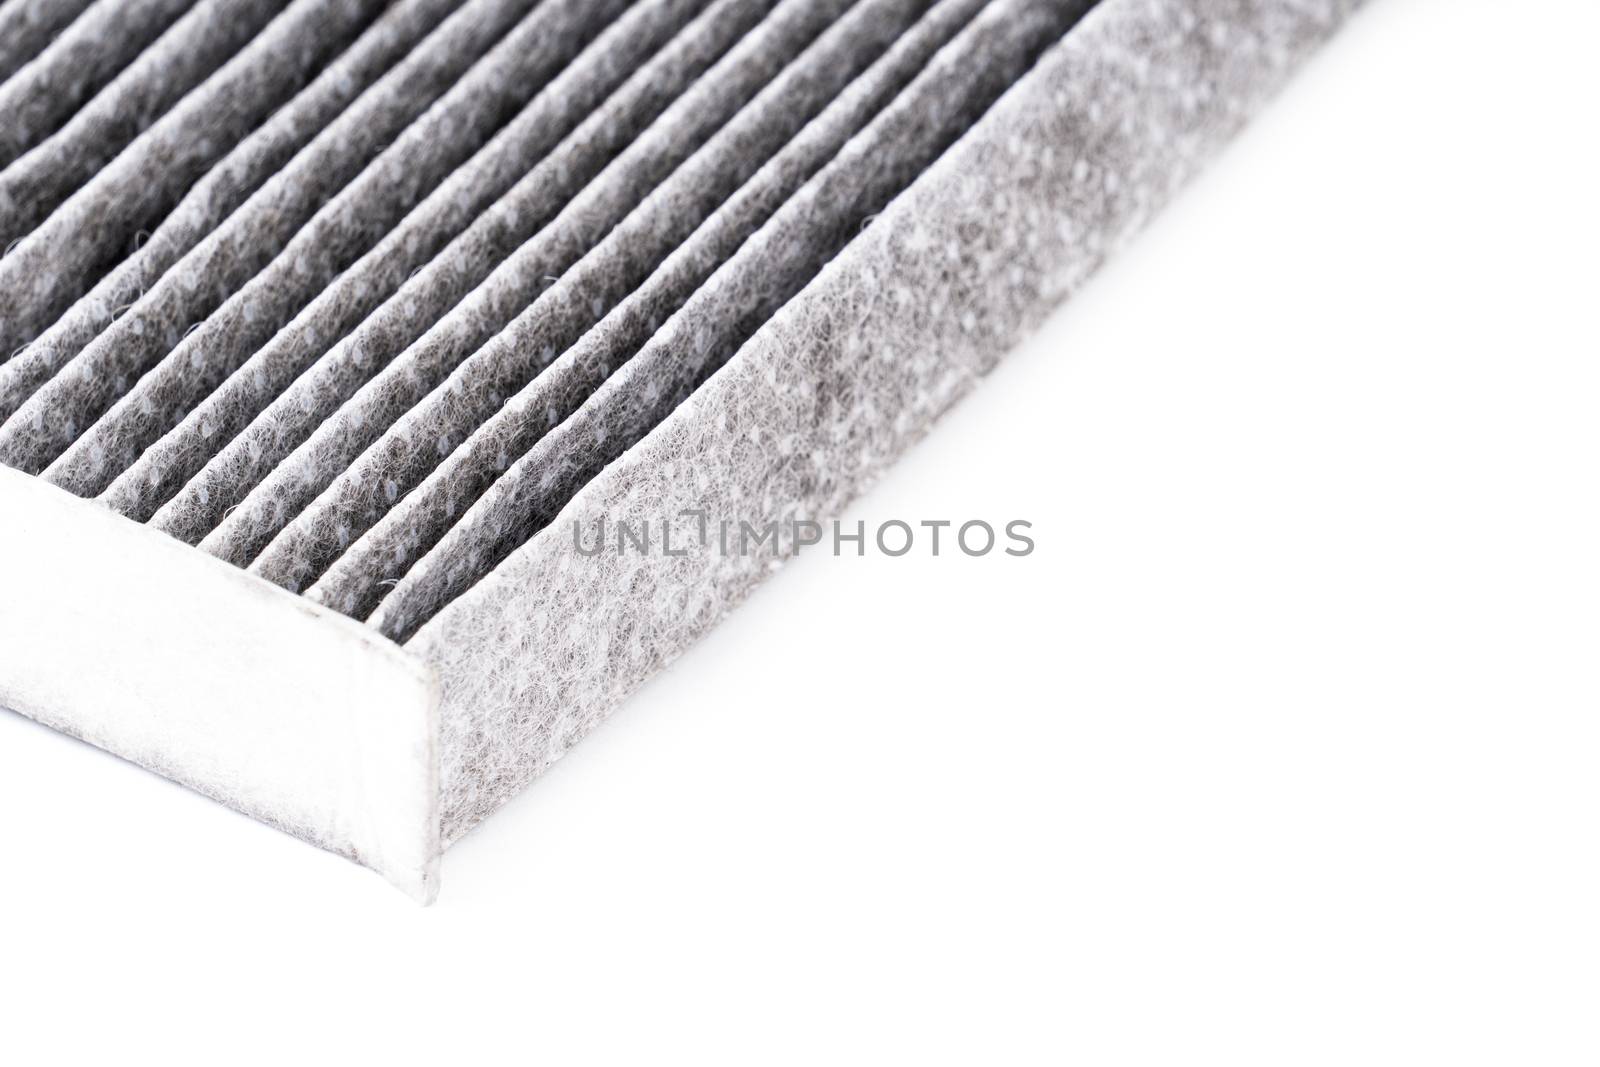 dirty car air conditioning filter isolated on white background